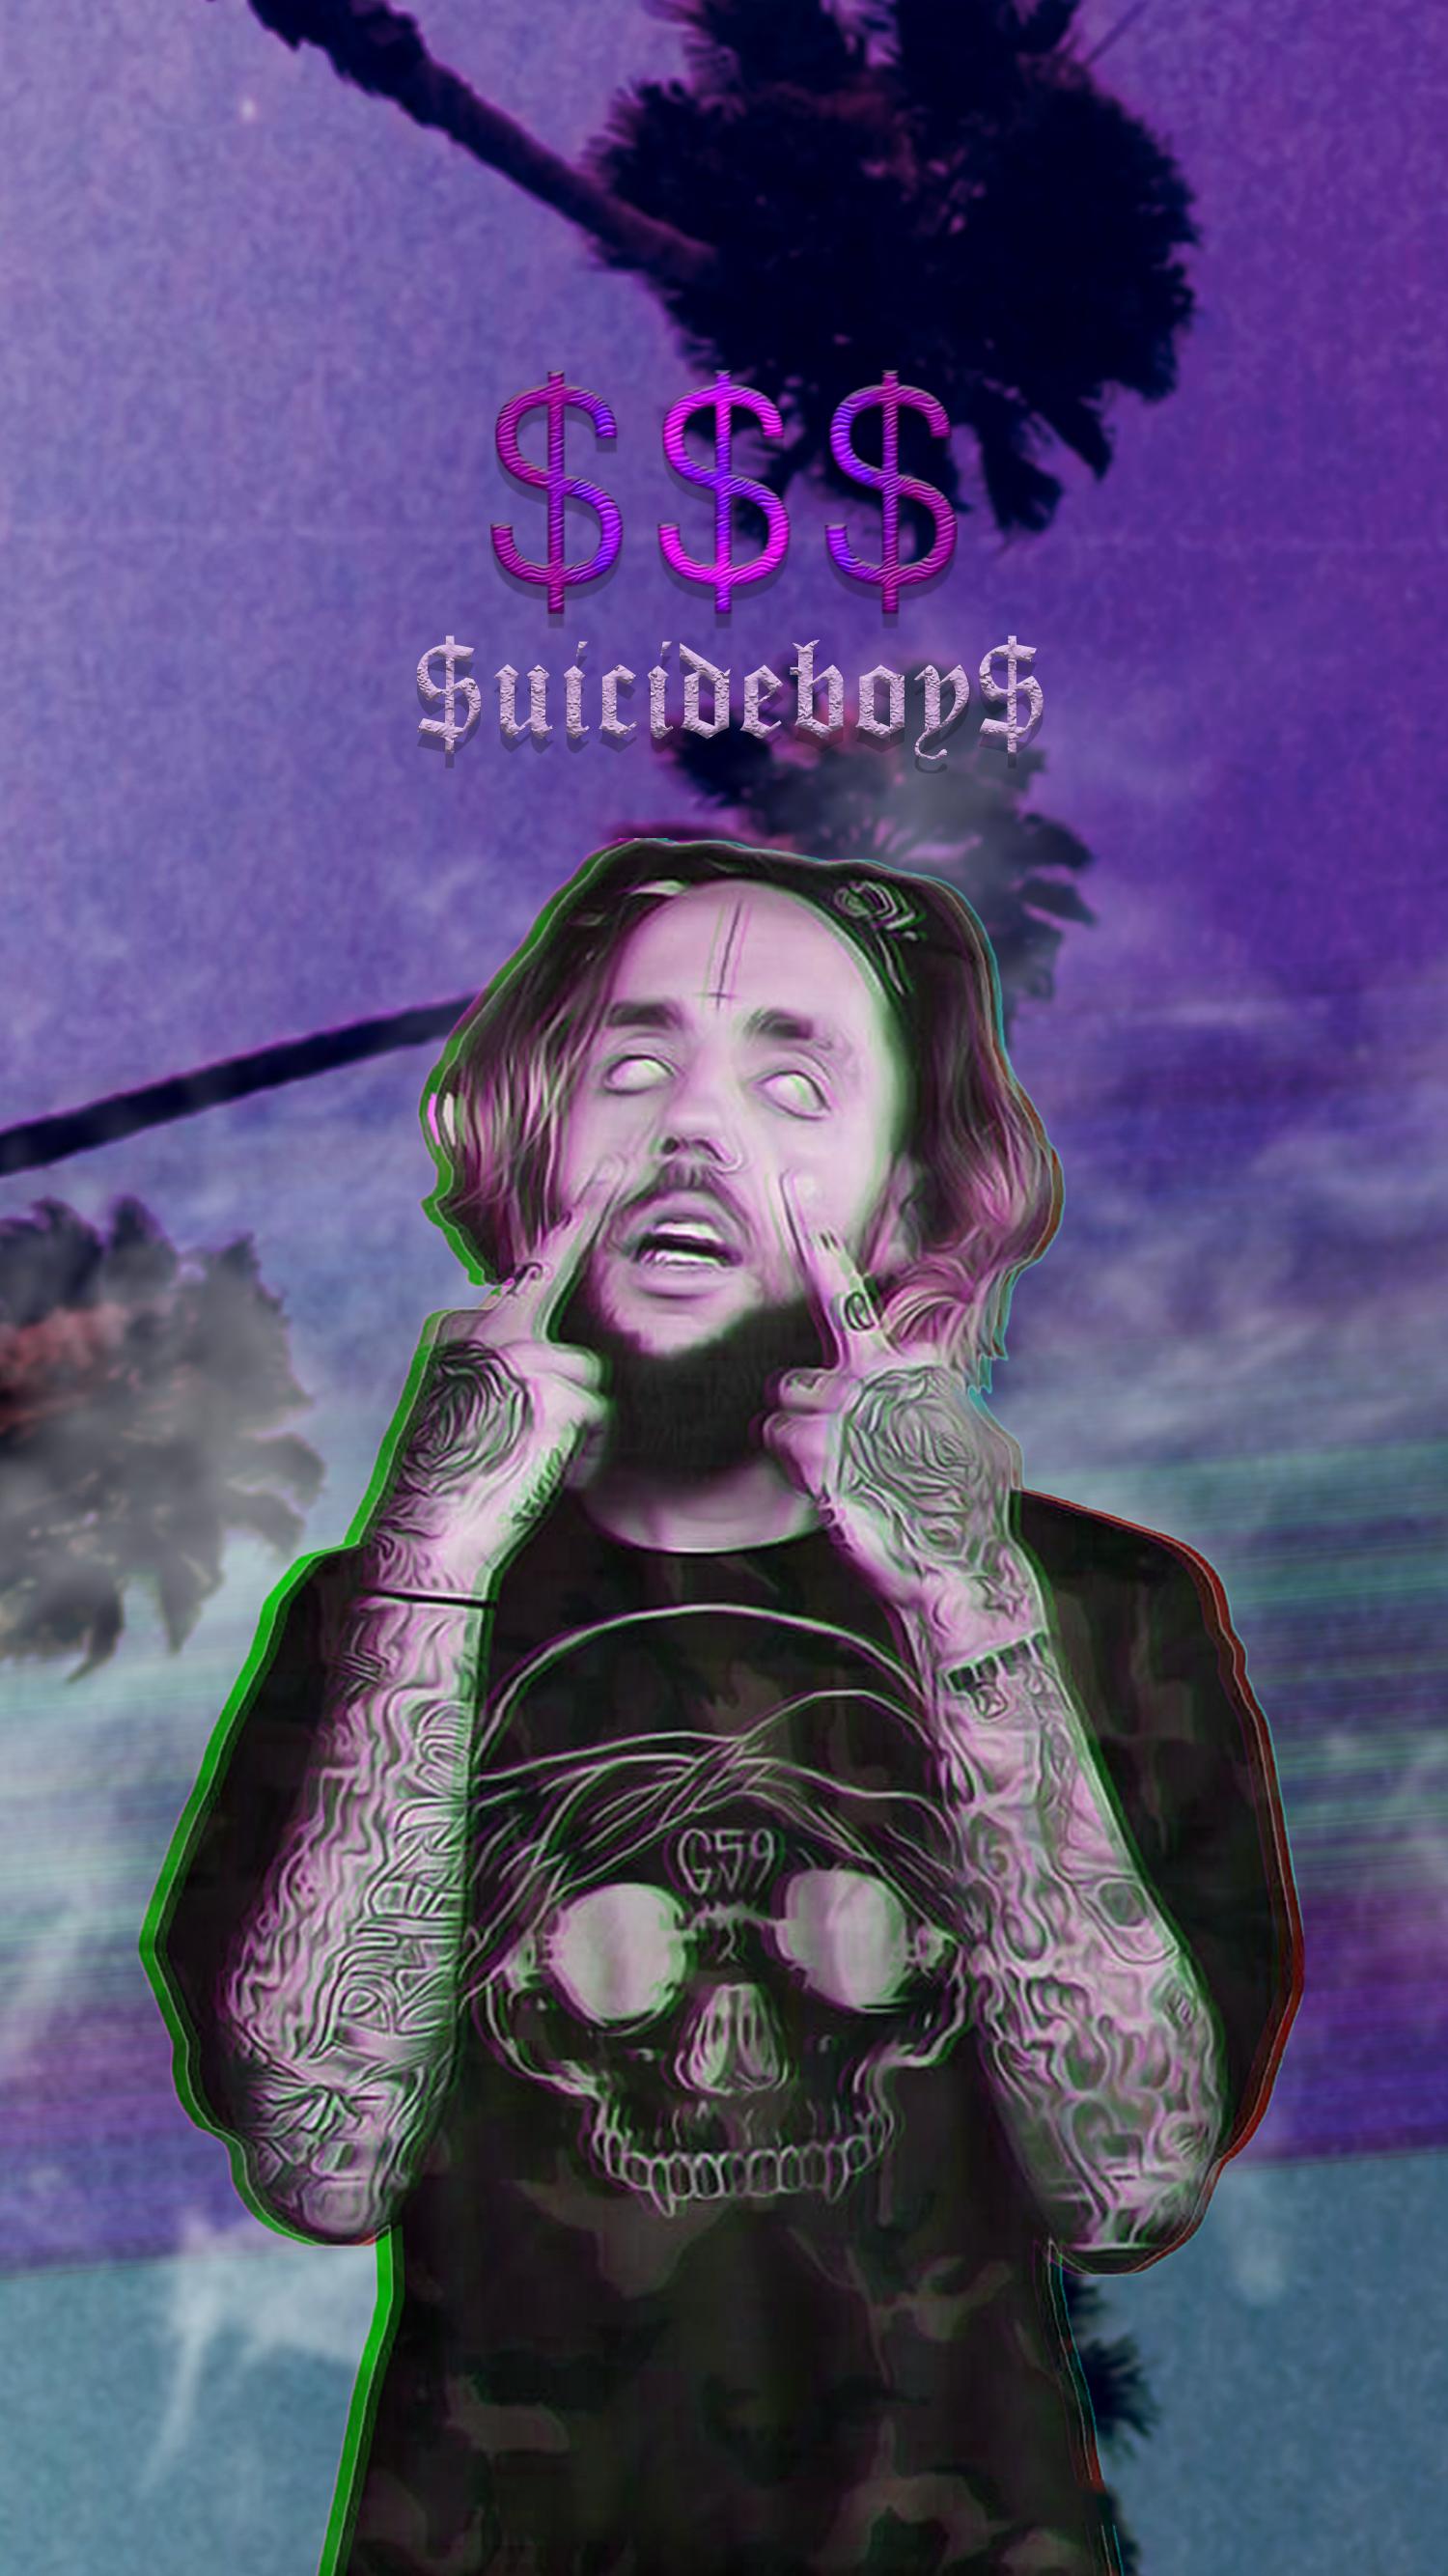 Saw a phone background for suicideboys, decided to make one as